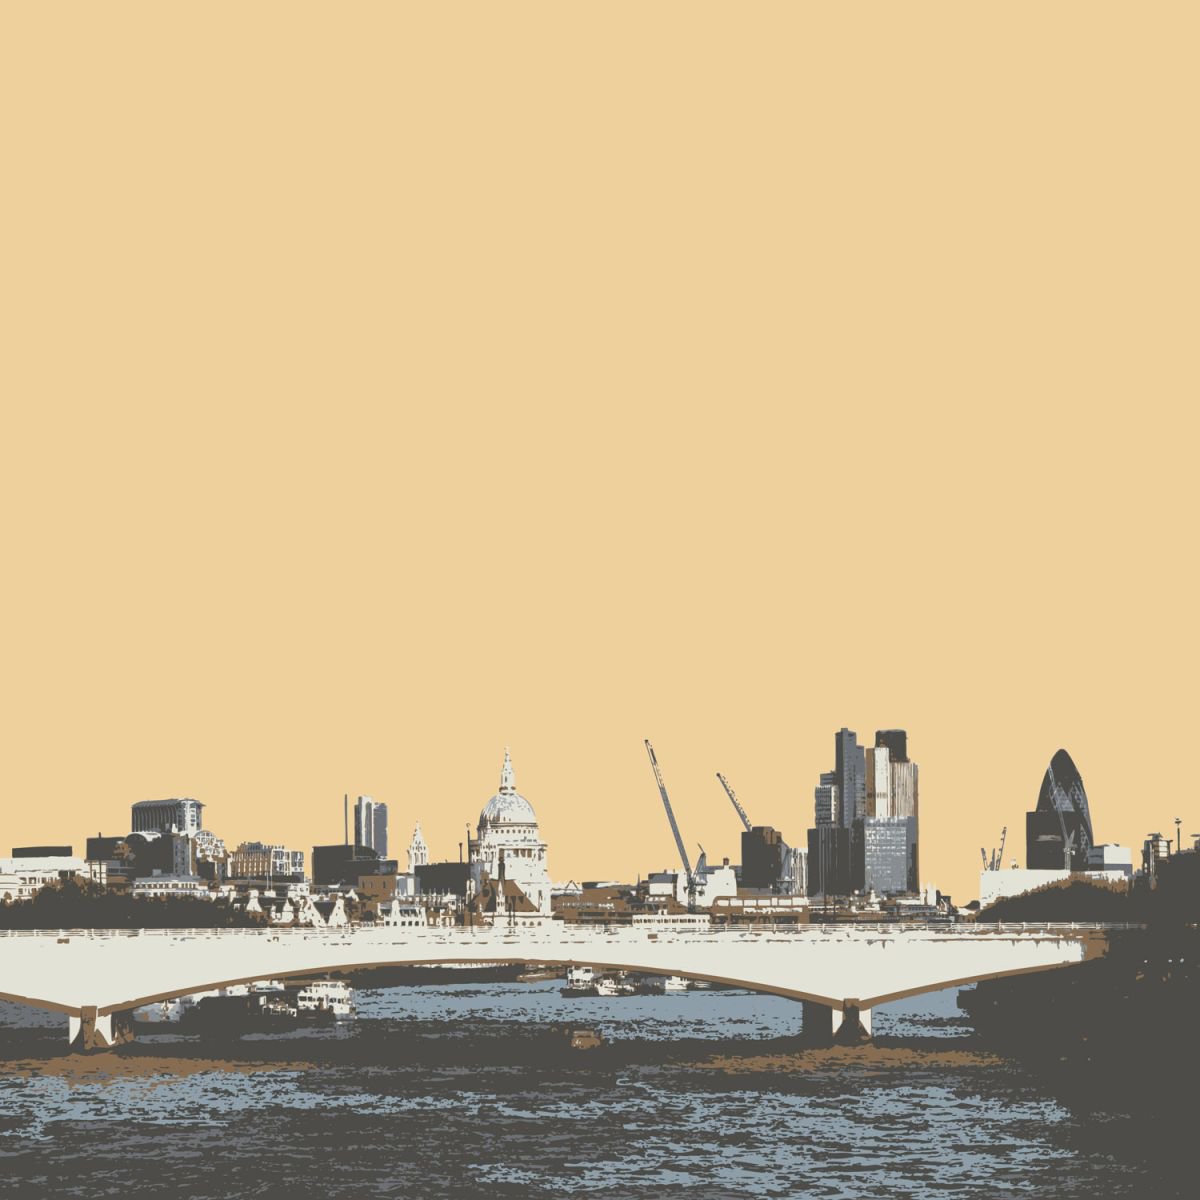 LONDON ON THE THAMES #2 by Keith Dodd